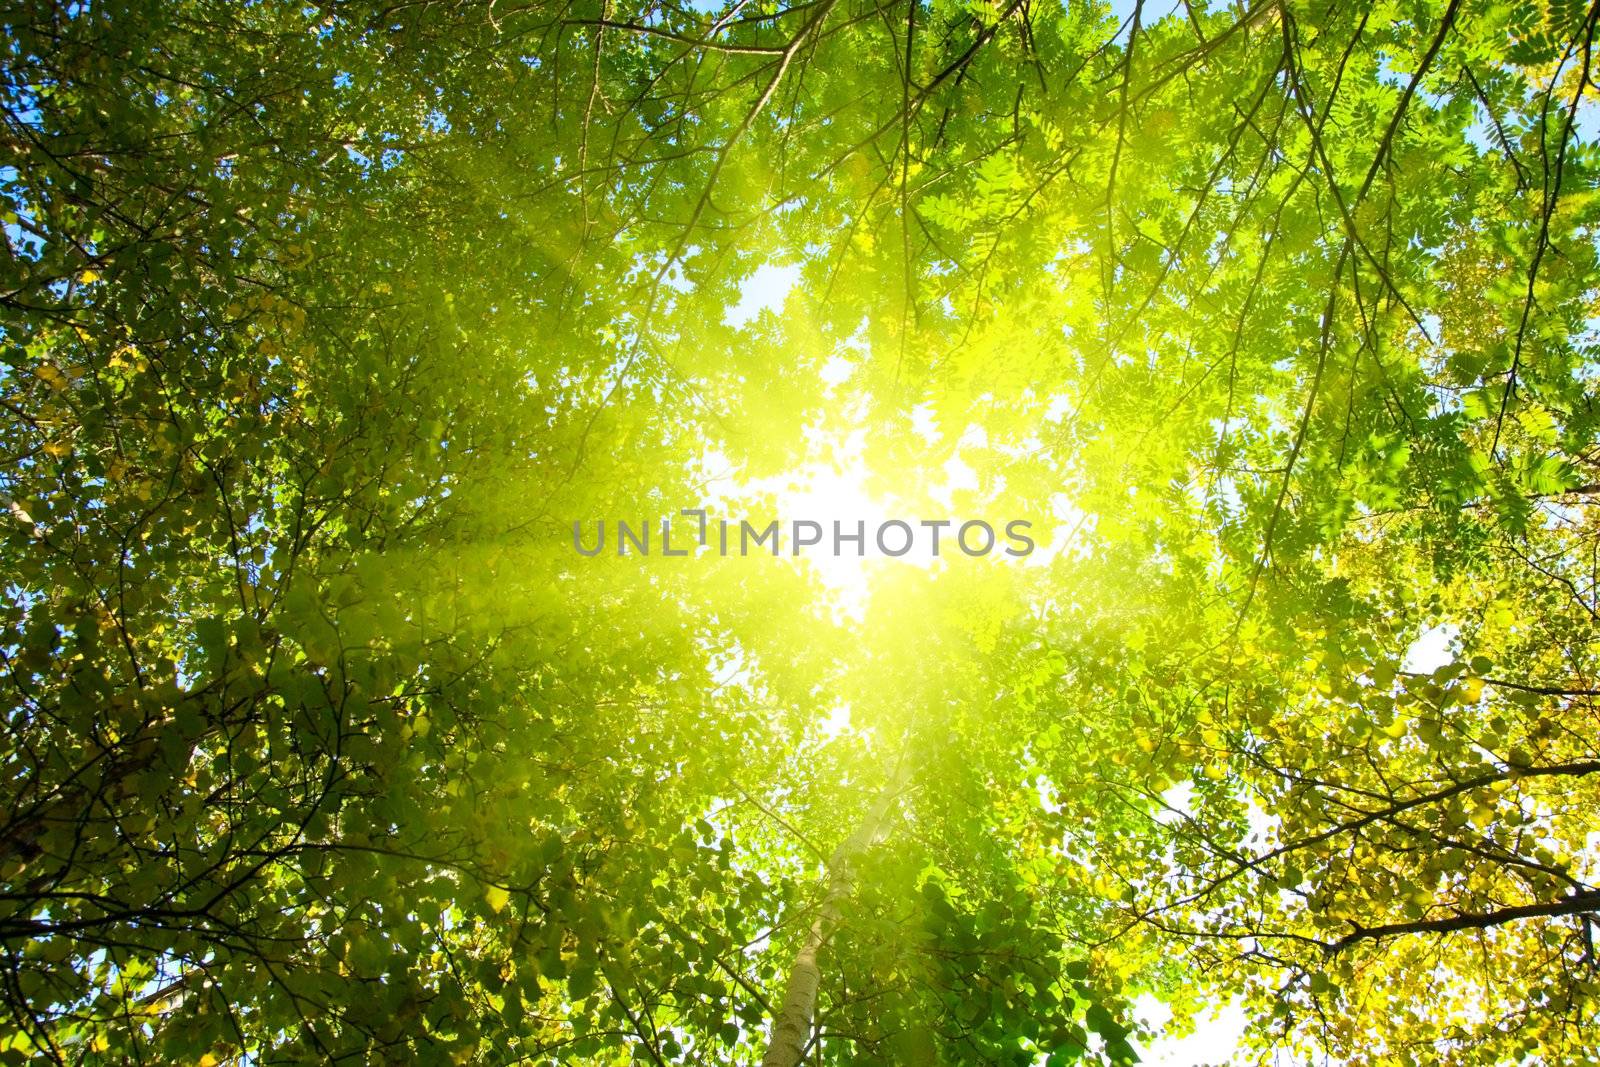 Look below, can be seen as a glimpse of the sun passes through the leaves